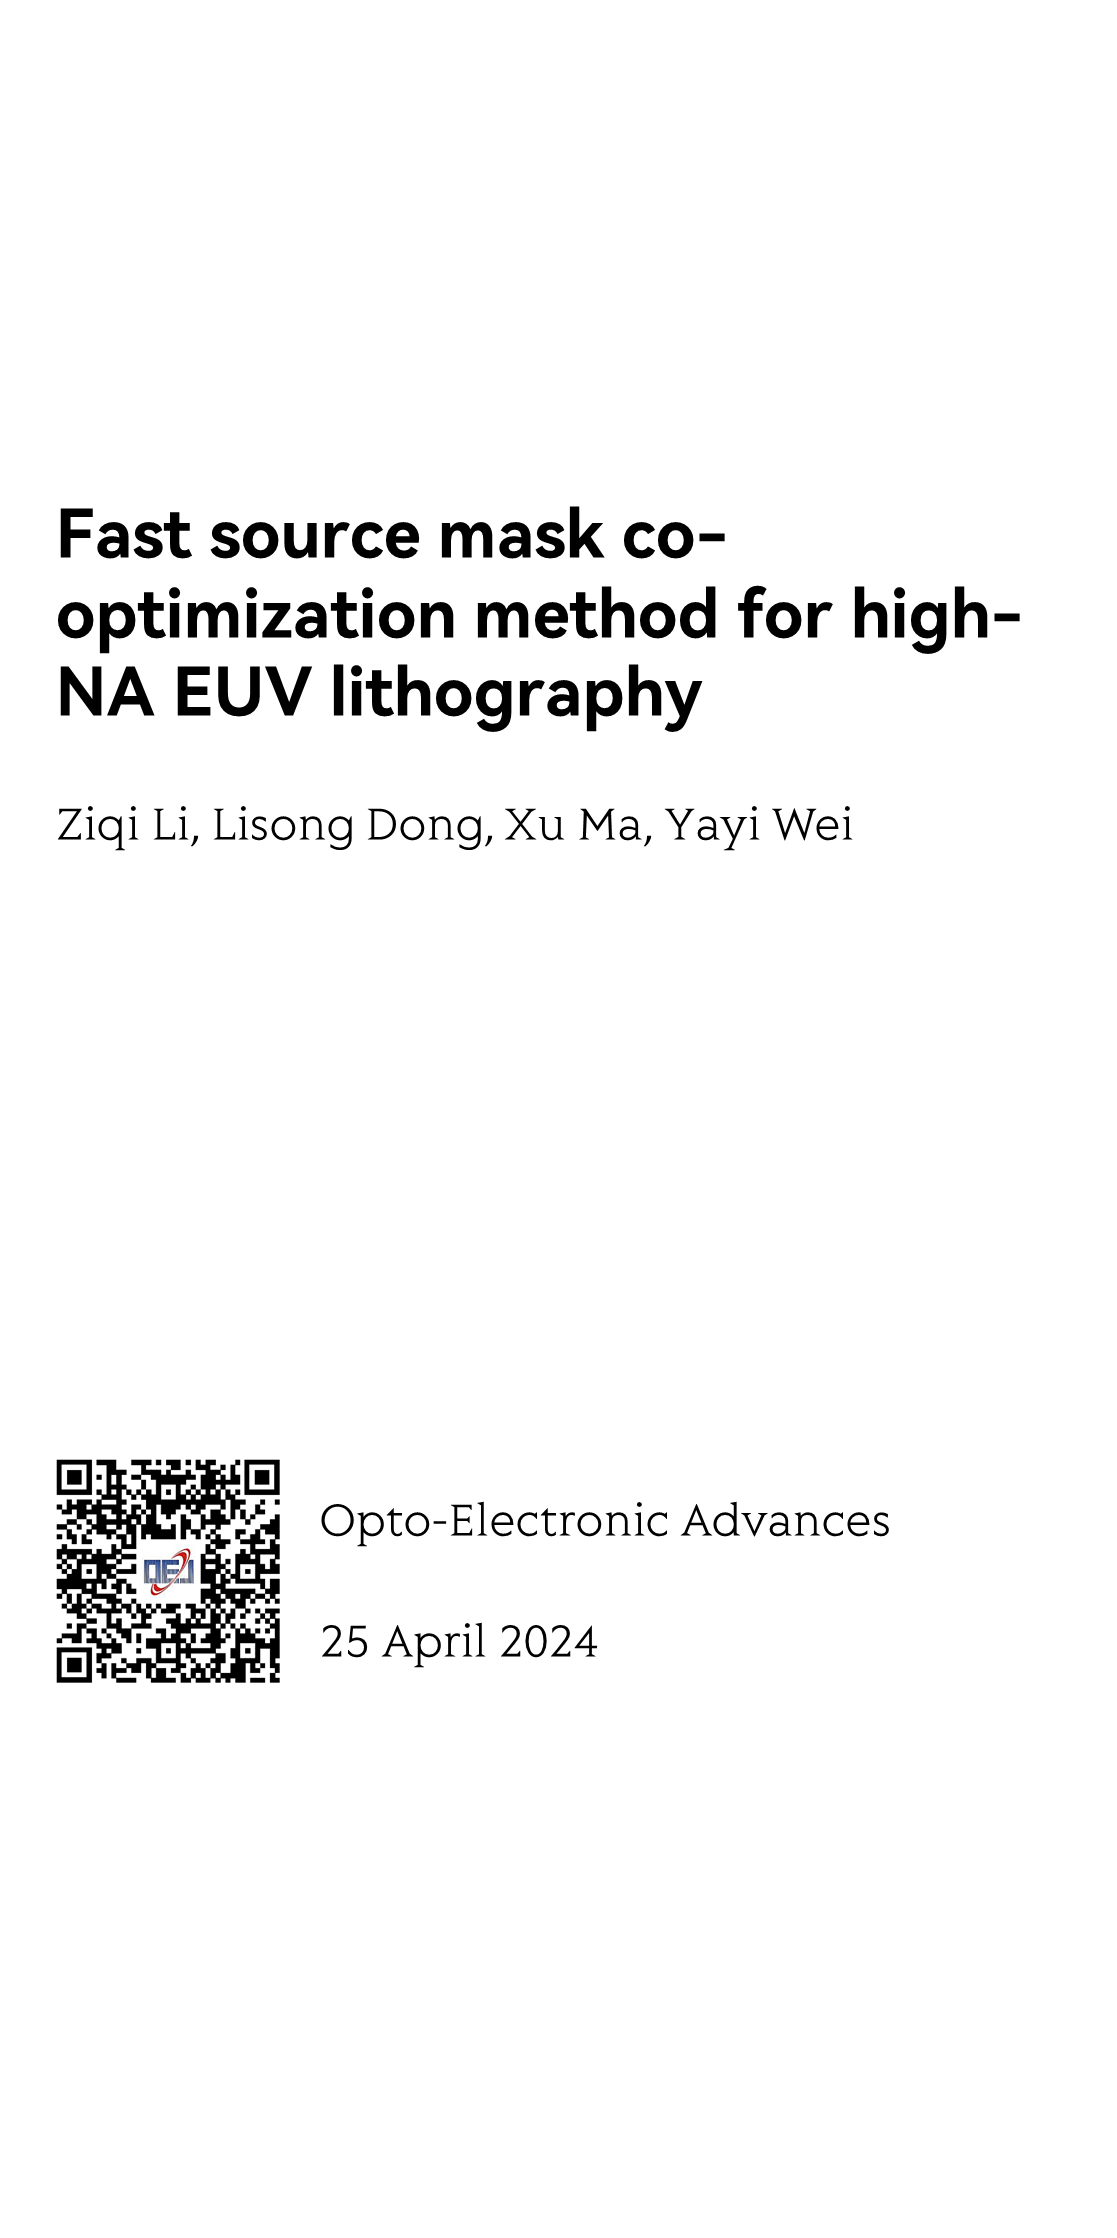 Fast source mask co-optimization method for high-NA EUV lithography_1